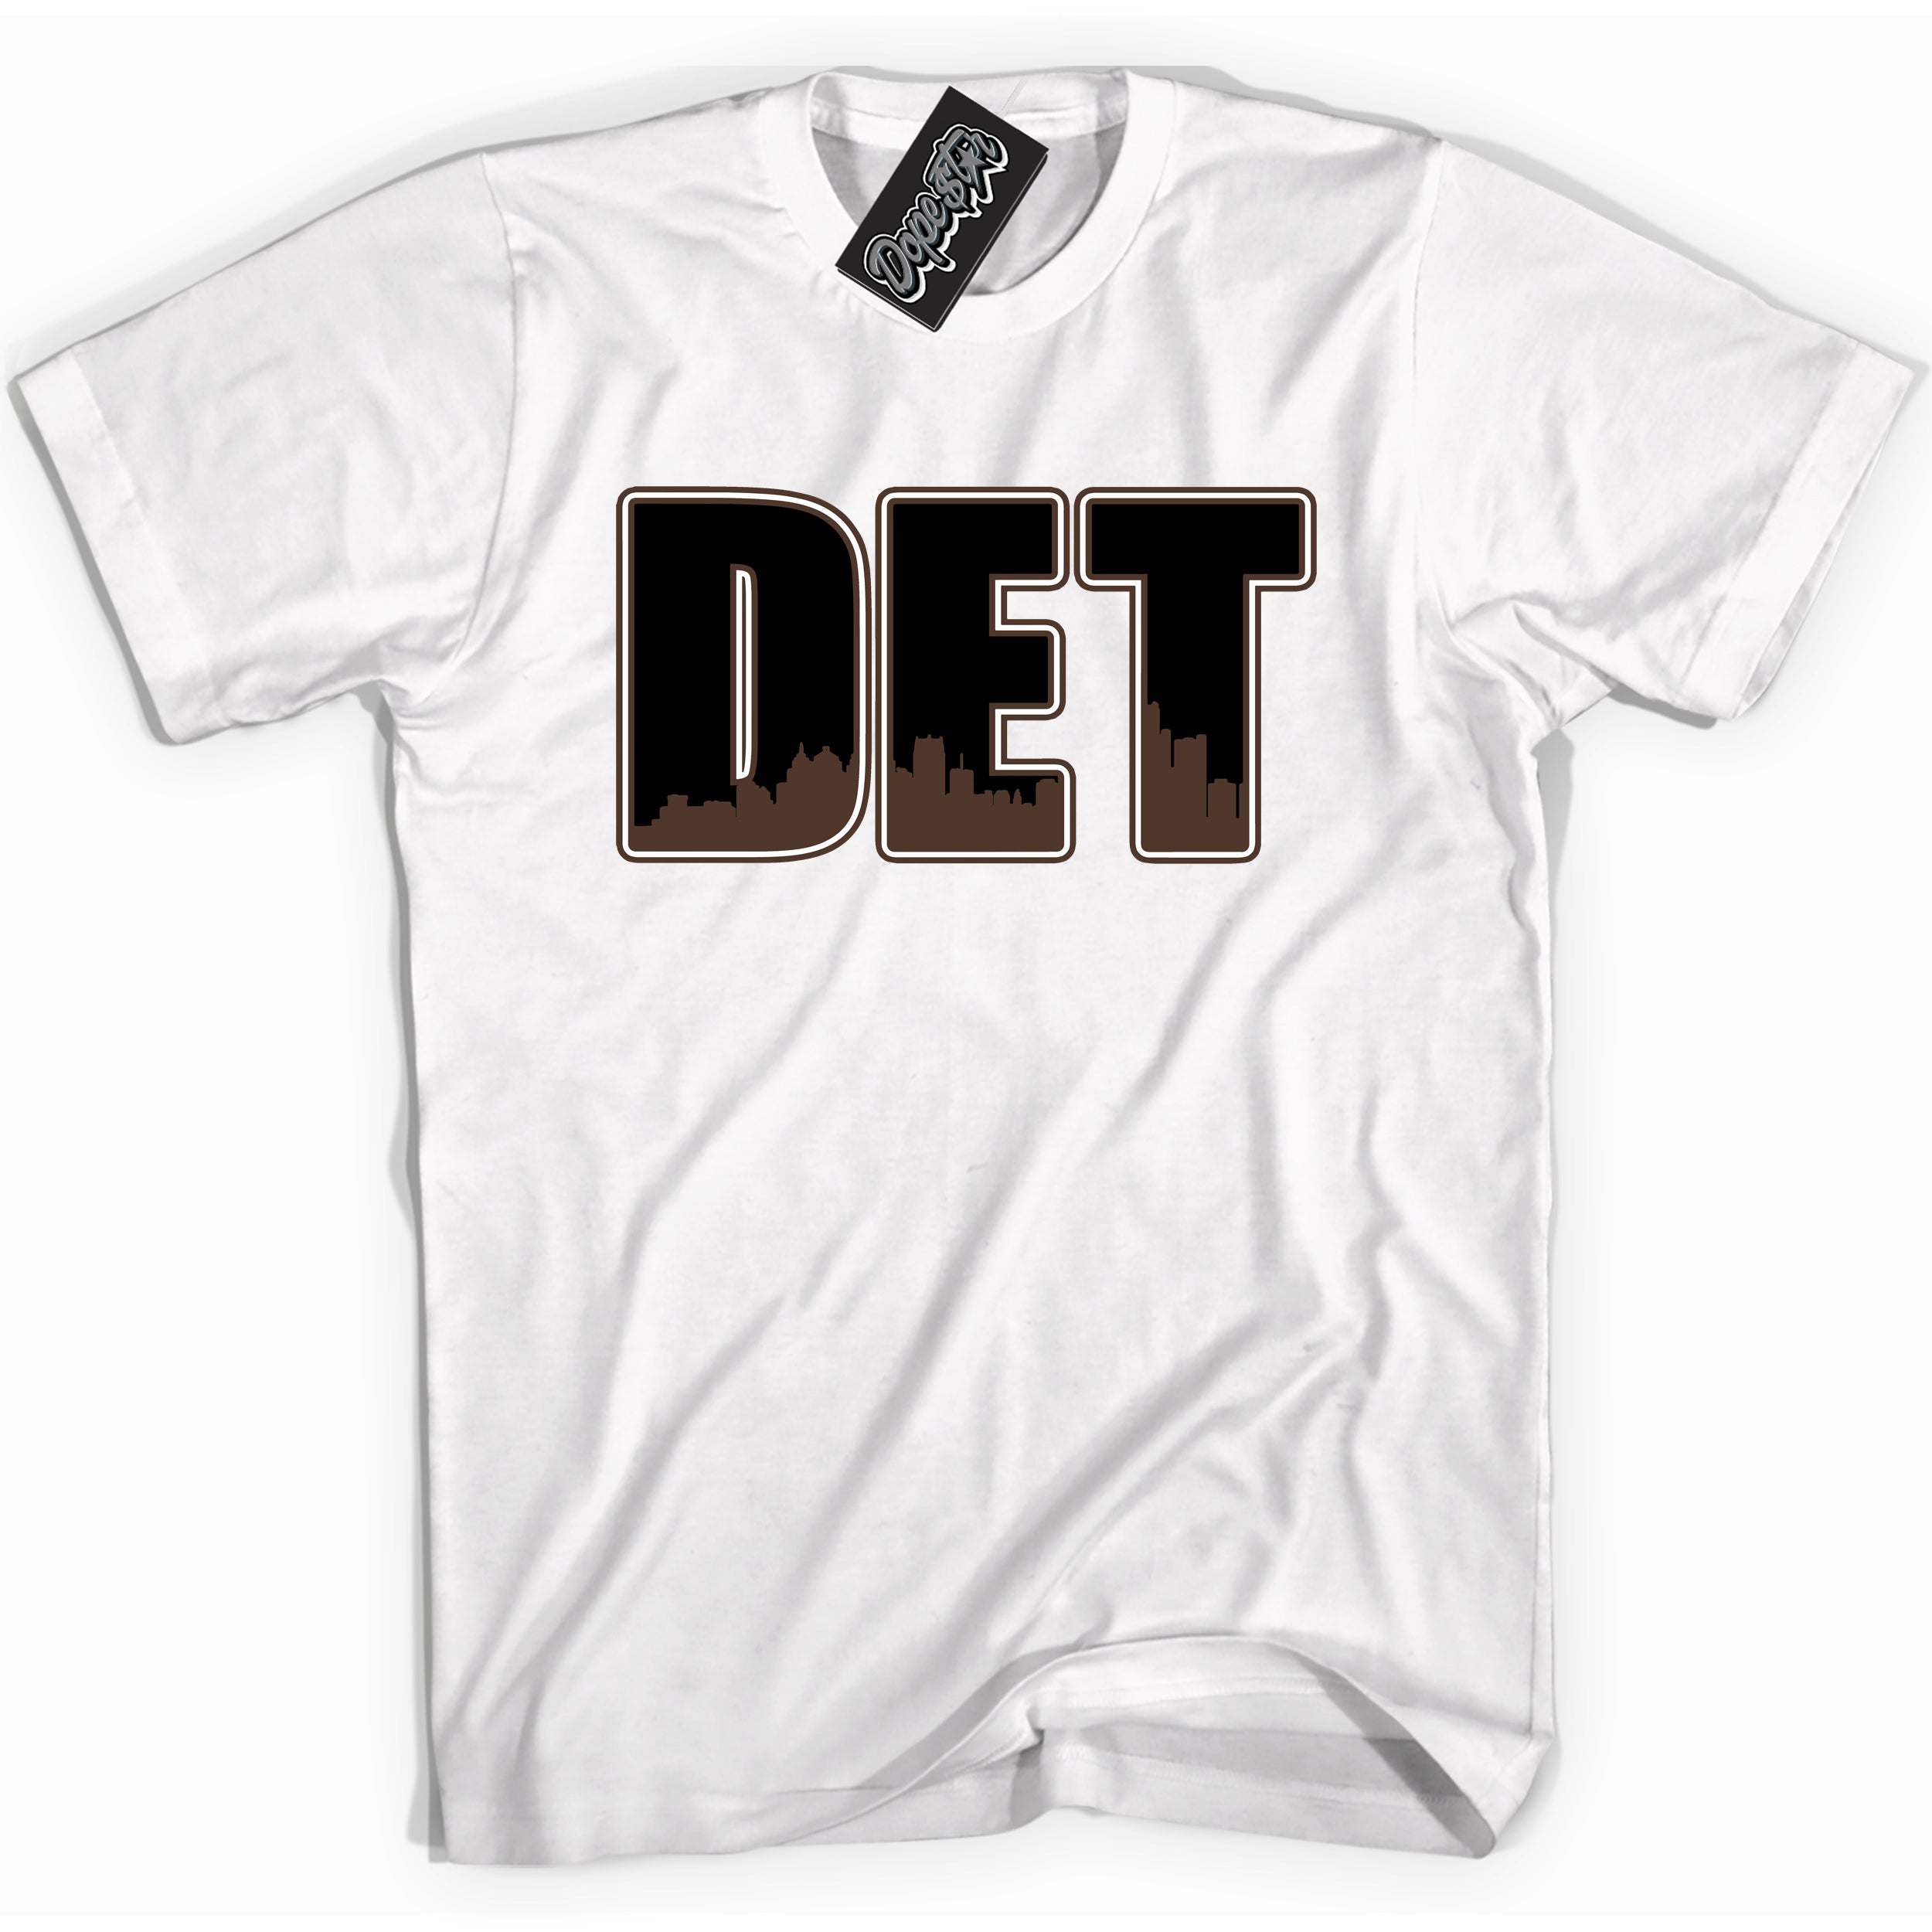 Cool White graphic tee with “ Detroit ” design, that perfectly matches Palomino 1s sneakers 